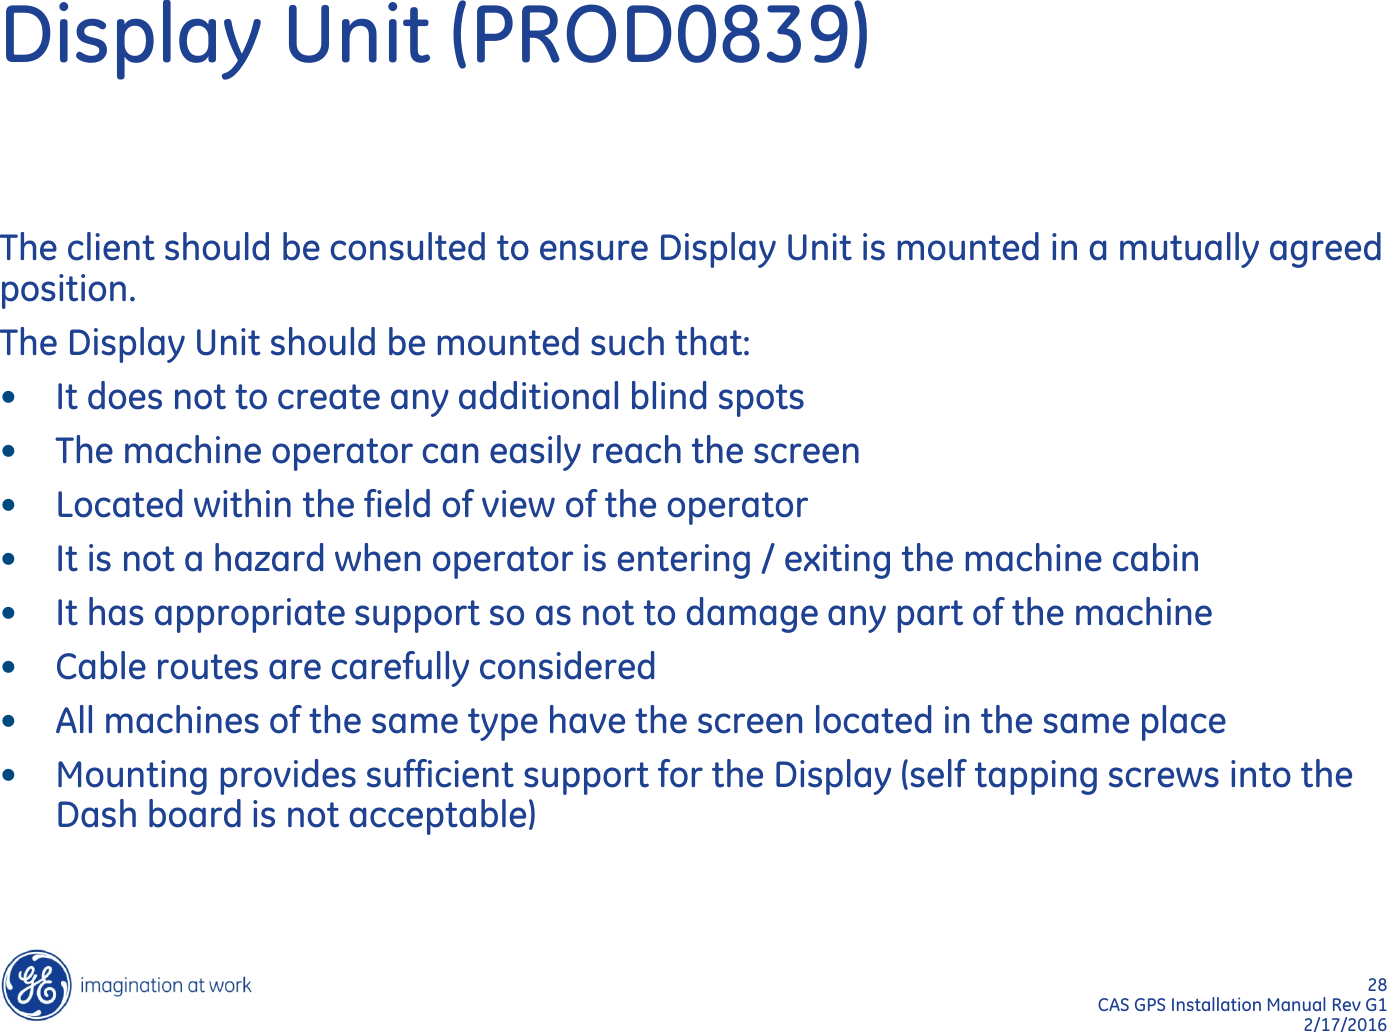 28  CAS GPS Installation Manual Rev G1 2/17/2016 Display Unit (PROD0839) The client should be consulted to ensure Display Unit is mounted in a mutually agreed position. The Display Unit should be mounted such that: •It does not to create any additional blind spots •The machine operator can easily reach the screen •Located within the field of view of the operator •It is not a hazard when operator is entering / exiting the machine cabin •It has appropriate support so as not to damage any part of the machine •Cable routes are carefully considered •All machines of the same type have the screen located in the same place •Mounting provides sufficient support for the Display (self tapping screws into the Dash board is not acceptable)   